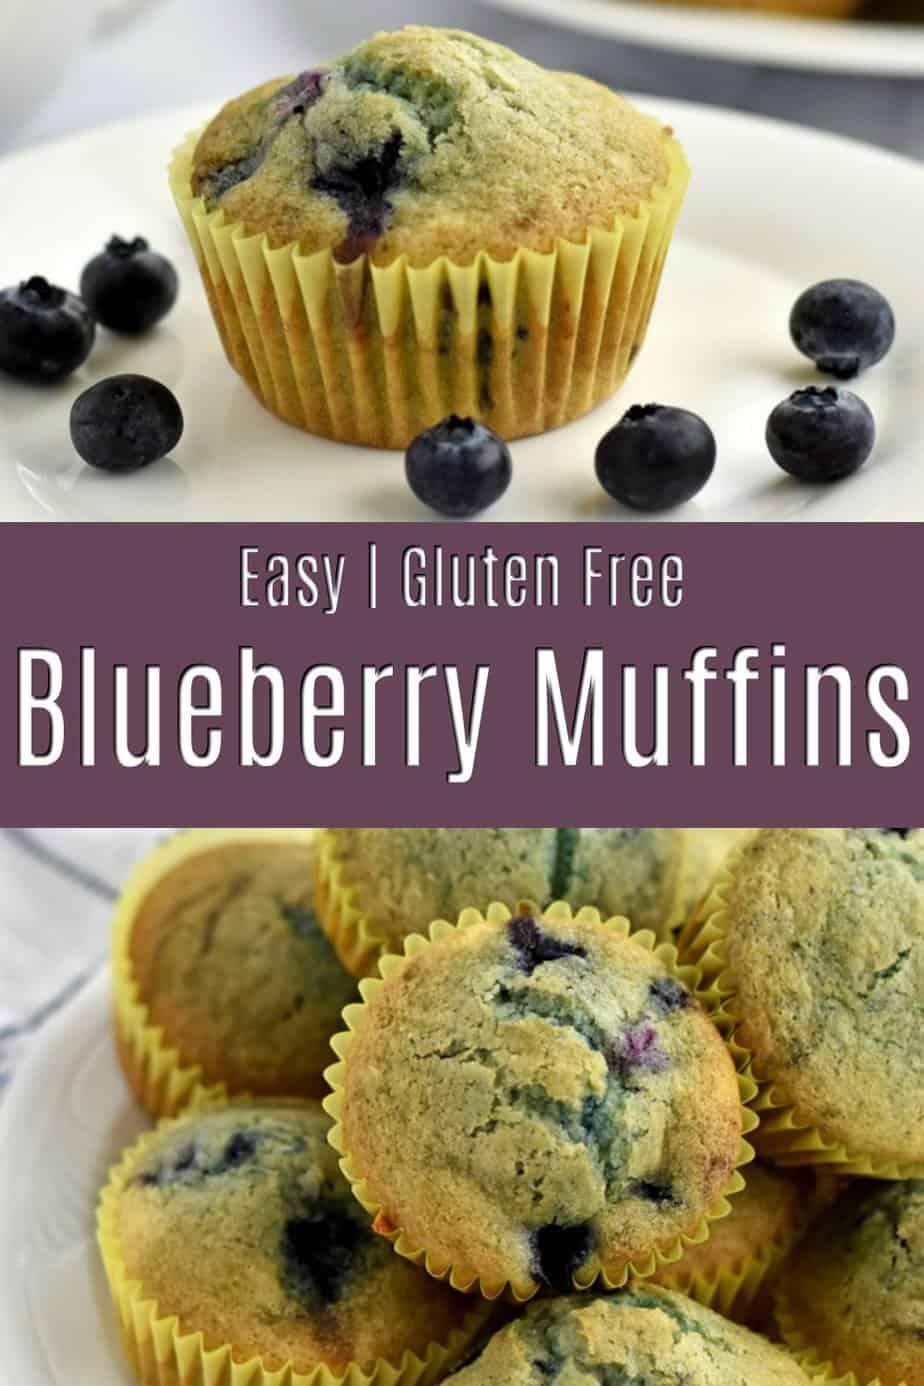 Top image is 1 gluten free blueberry muffin and blueberries on a white plate, middle image is purple text overlay, and bottom image is stack of gluten free blueberry muffins on a white plate.